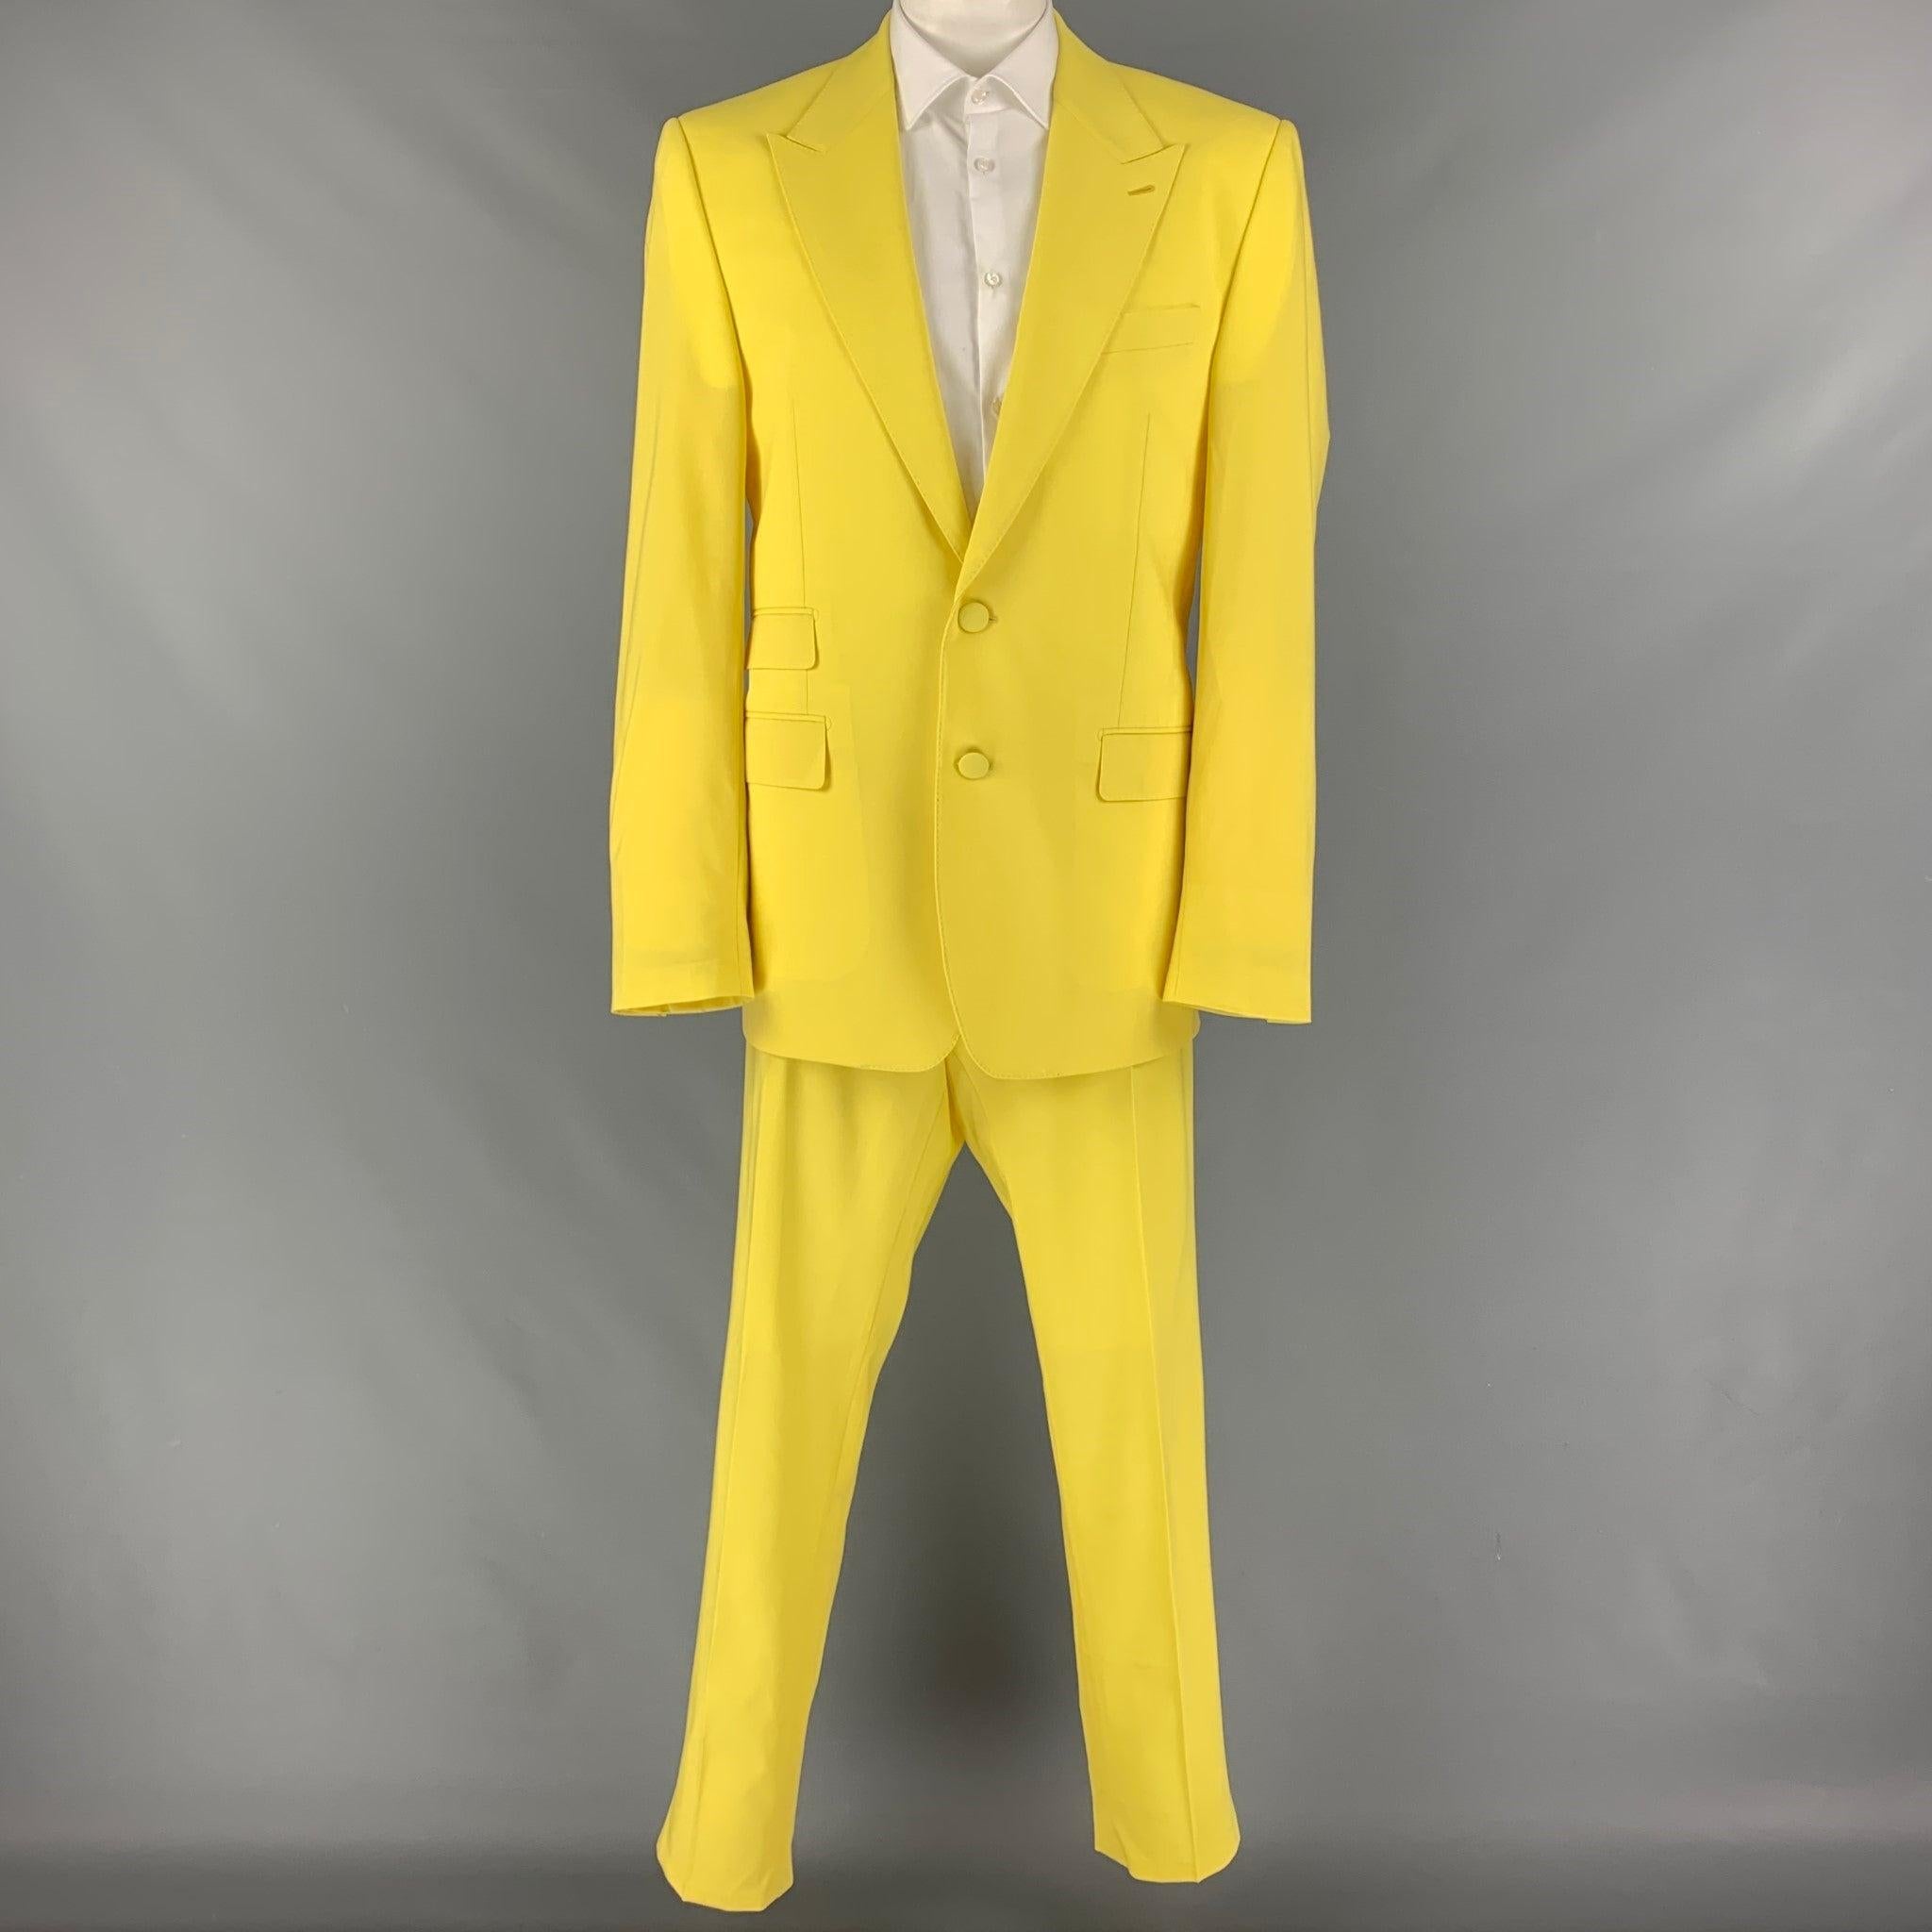 DOLCE & GABBANA
suit comes in a yellow wool with a full liner and includes a single breasted, double button sport coat with a peak lapel and matching pleated front trousers. Made in Italy. New With Tags.  

Marked:   58 

Measurements: 
 